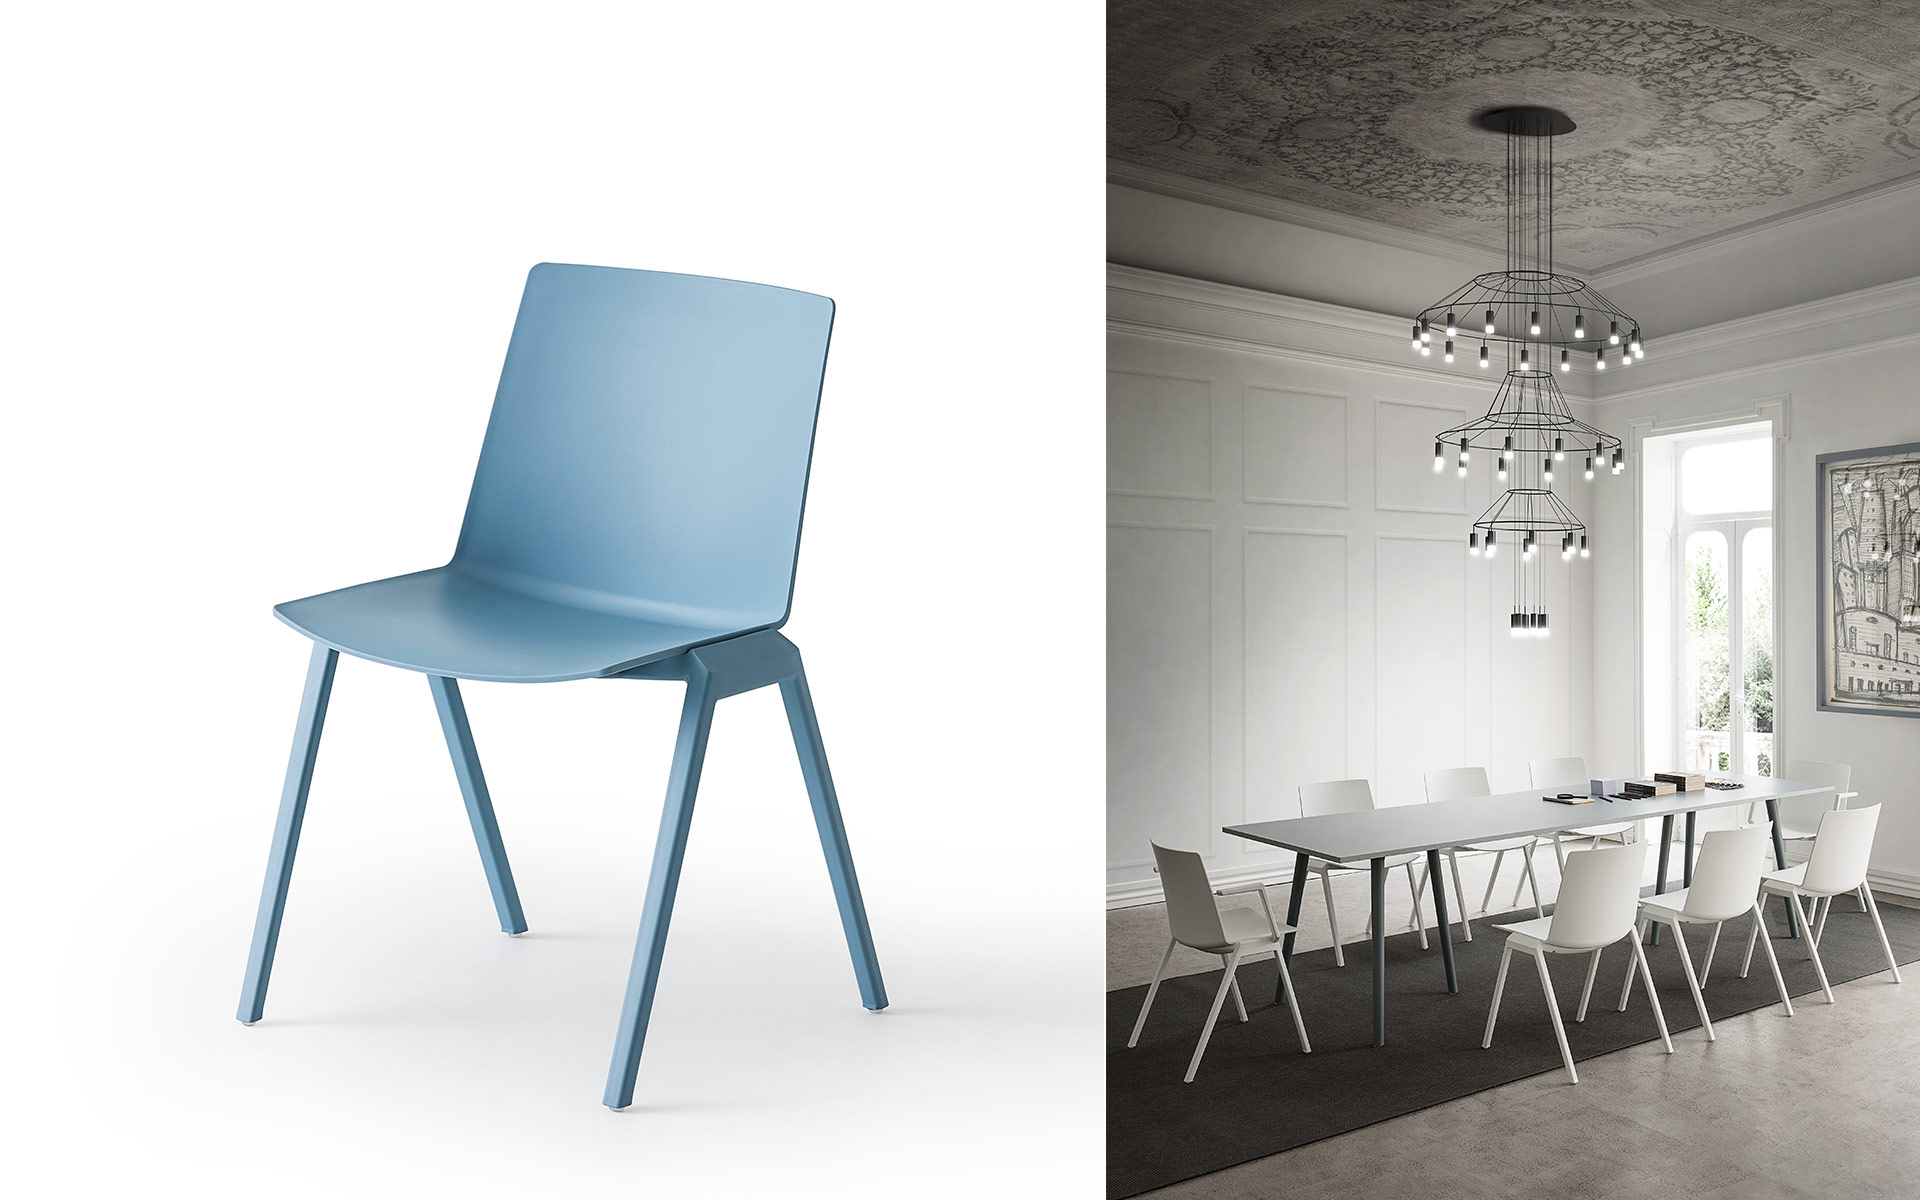 Joule Chairs